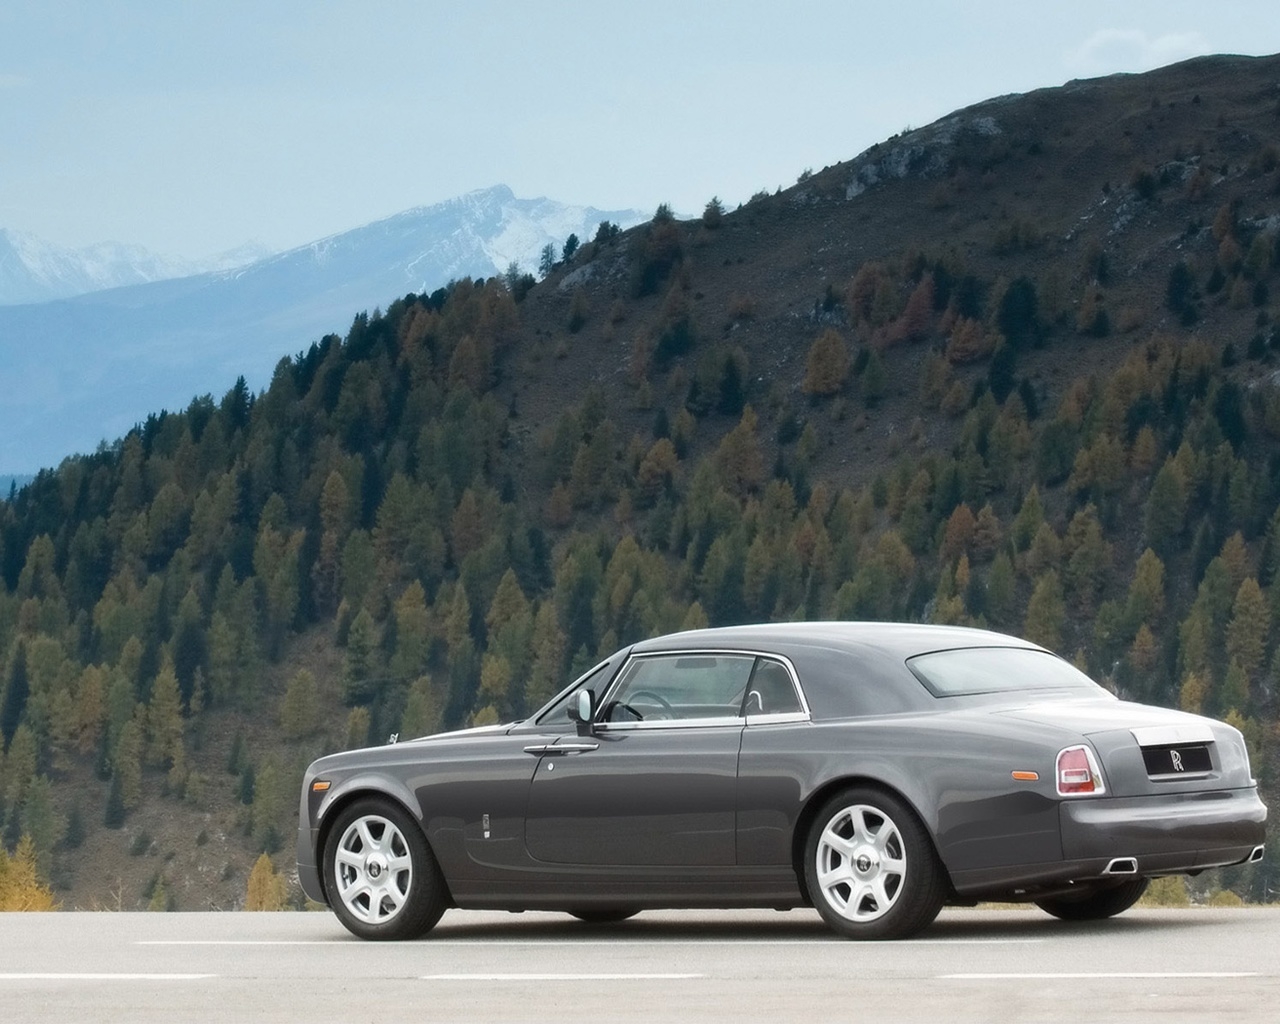 Amazing Rolls Royce Side Angle for 1280 x 1024 resolution